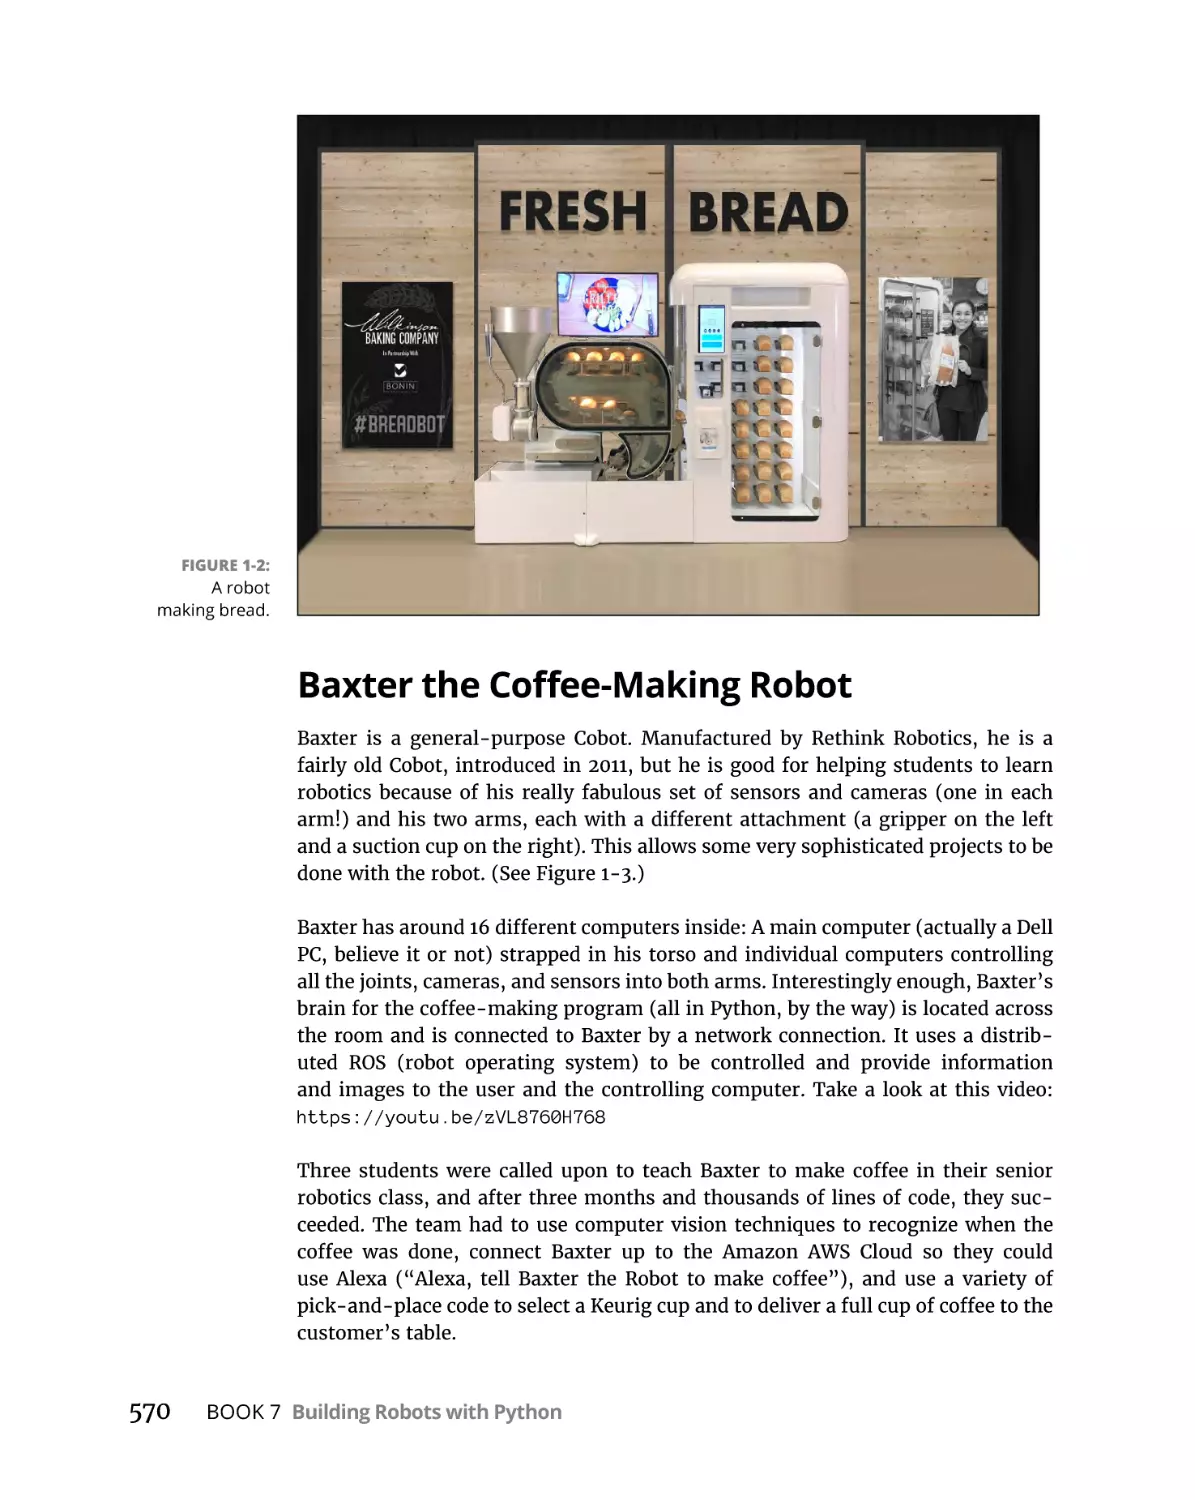 Baxter the Coffee-Making Robot